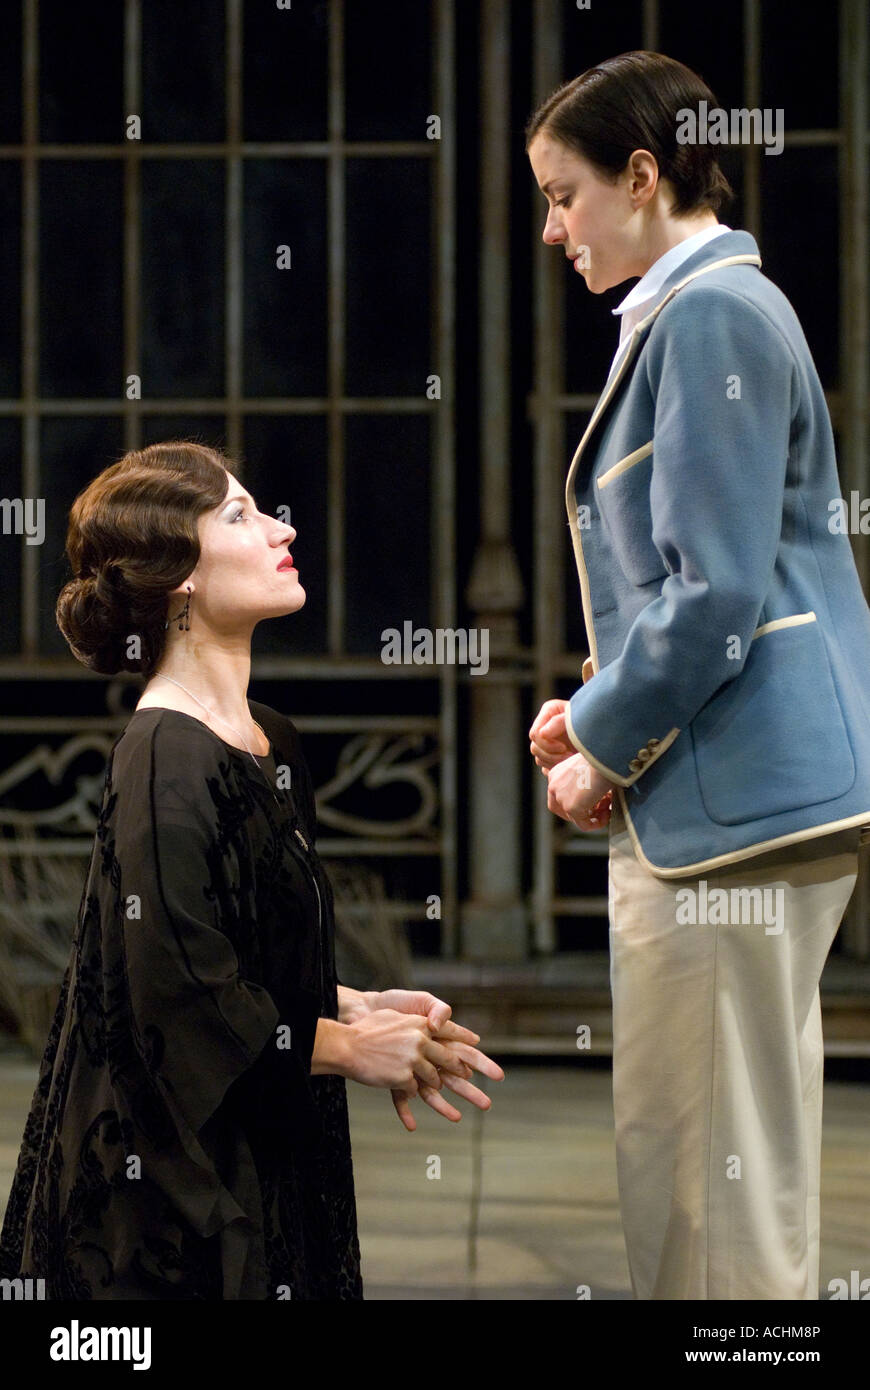 Kate Fleetwood playing Olivia left and Laura Rees as Viola in Twelfth Night, Chichester Festival Theatre, Sussex, UK. July 2007. Stock Photo